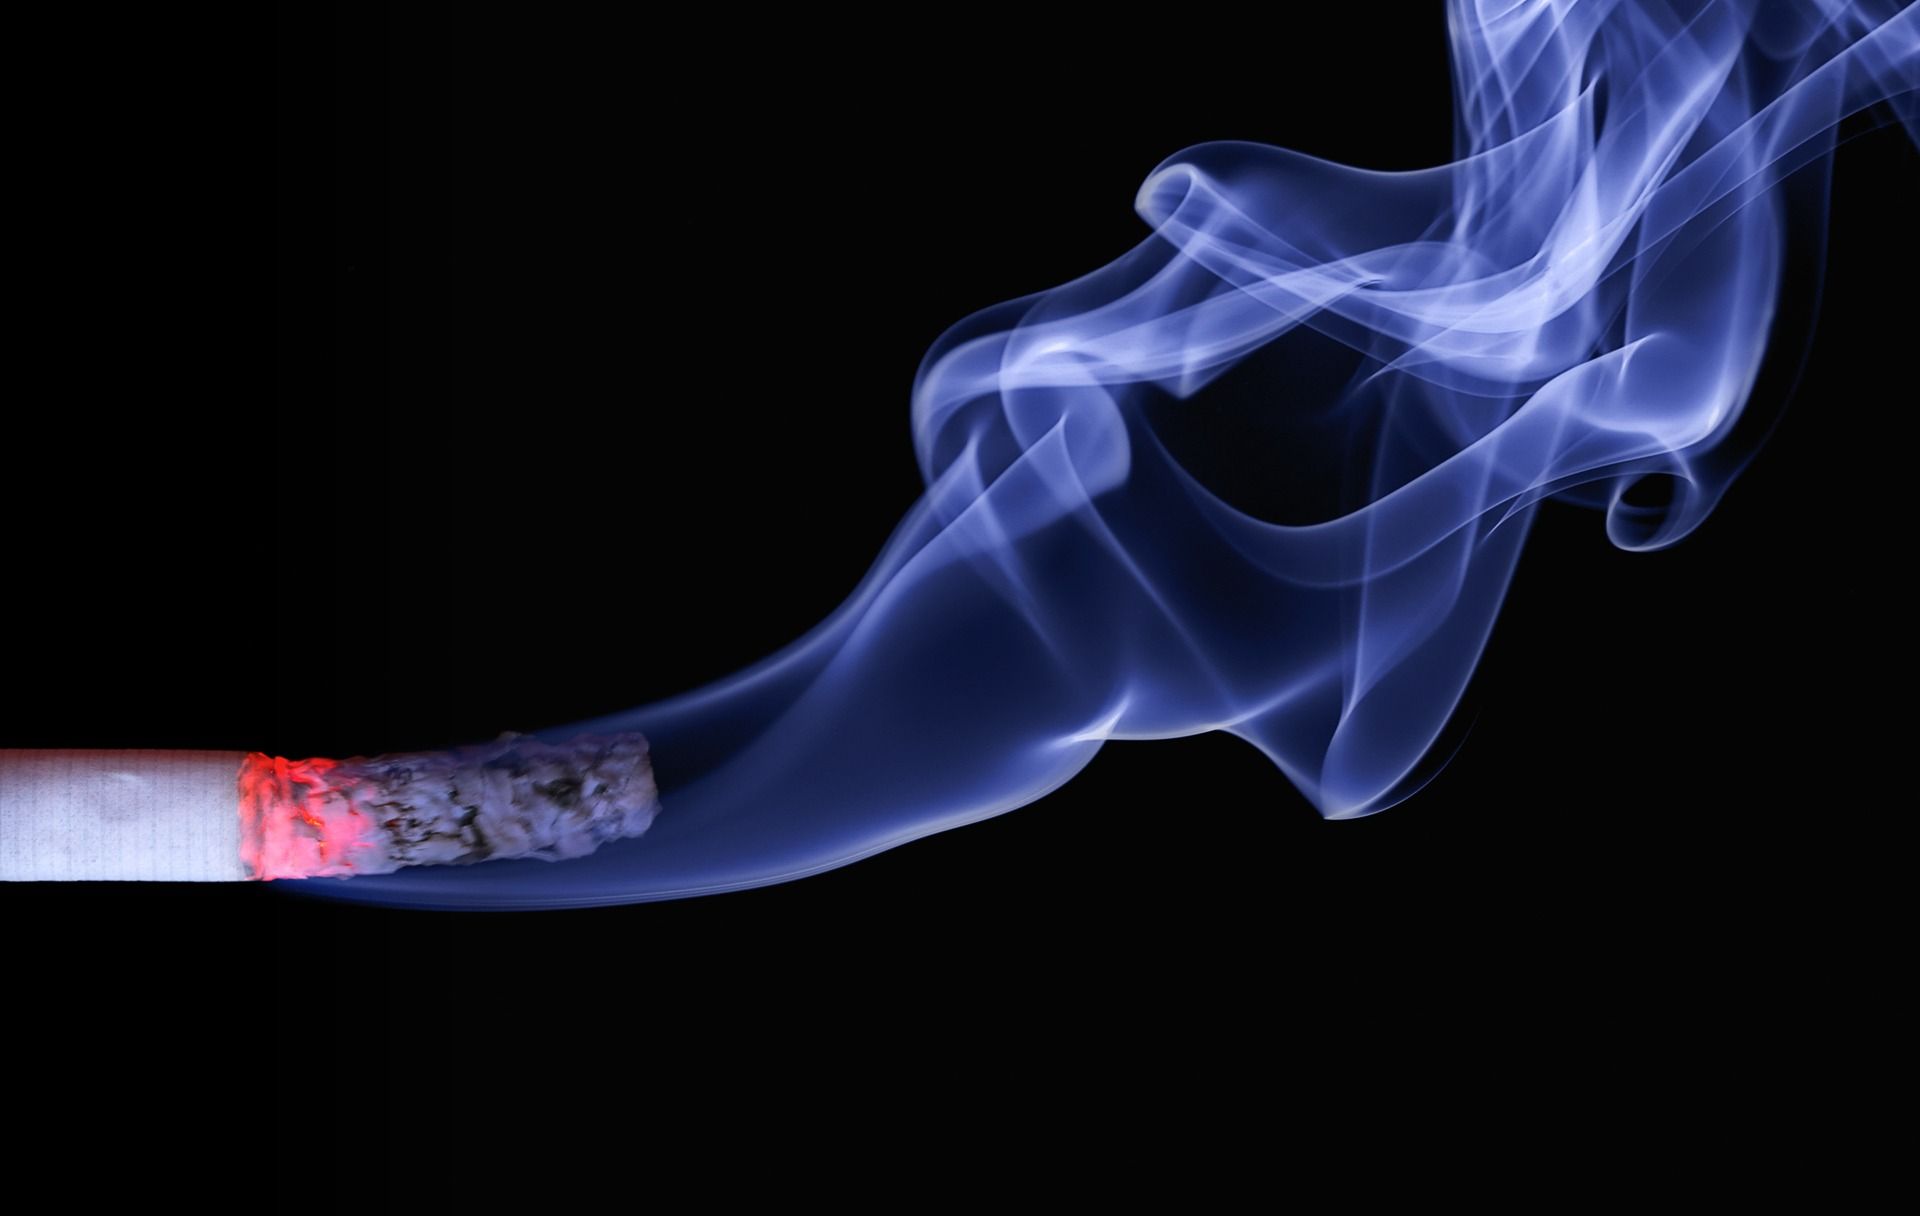 Lighted Cigarette Stick and White Smoke Wallpaper · Free